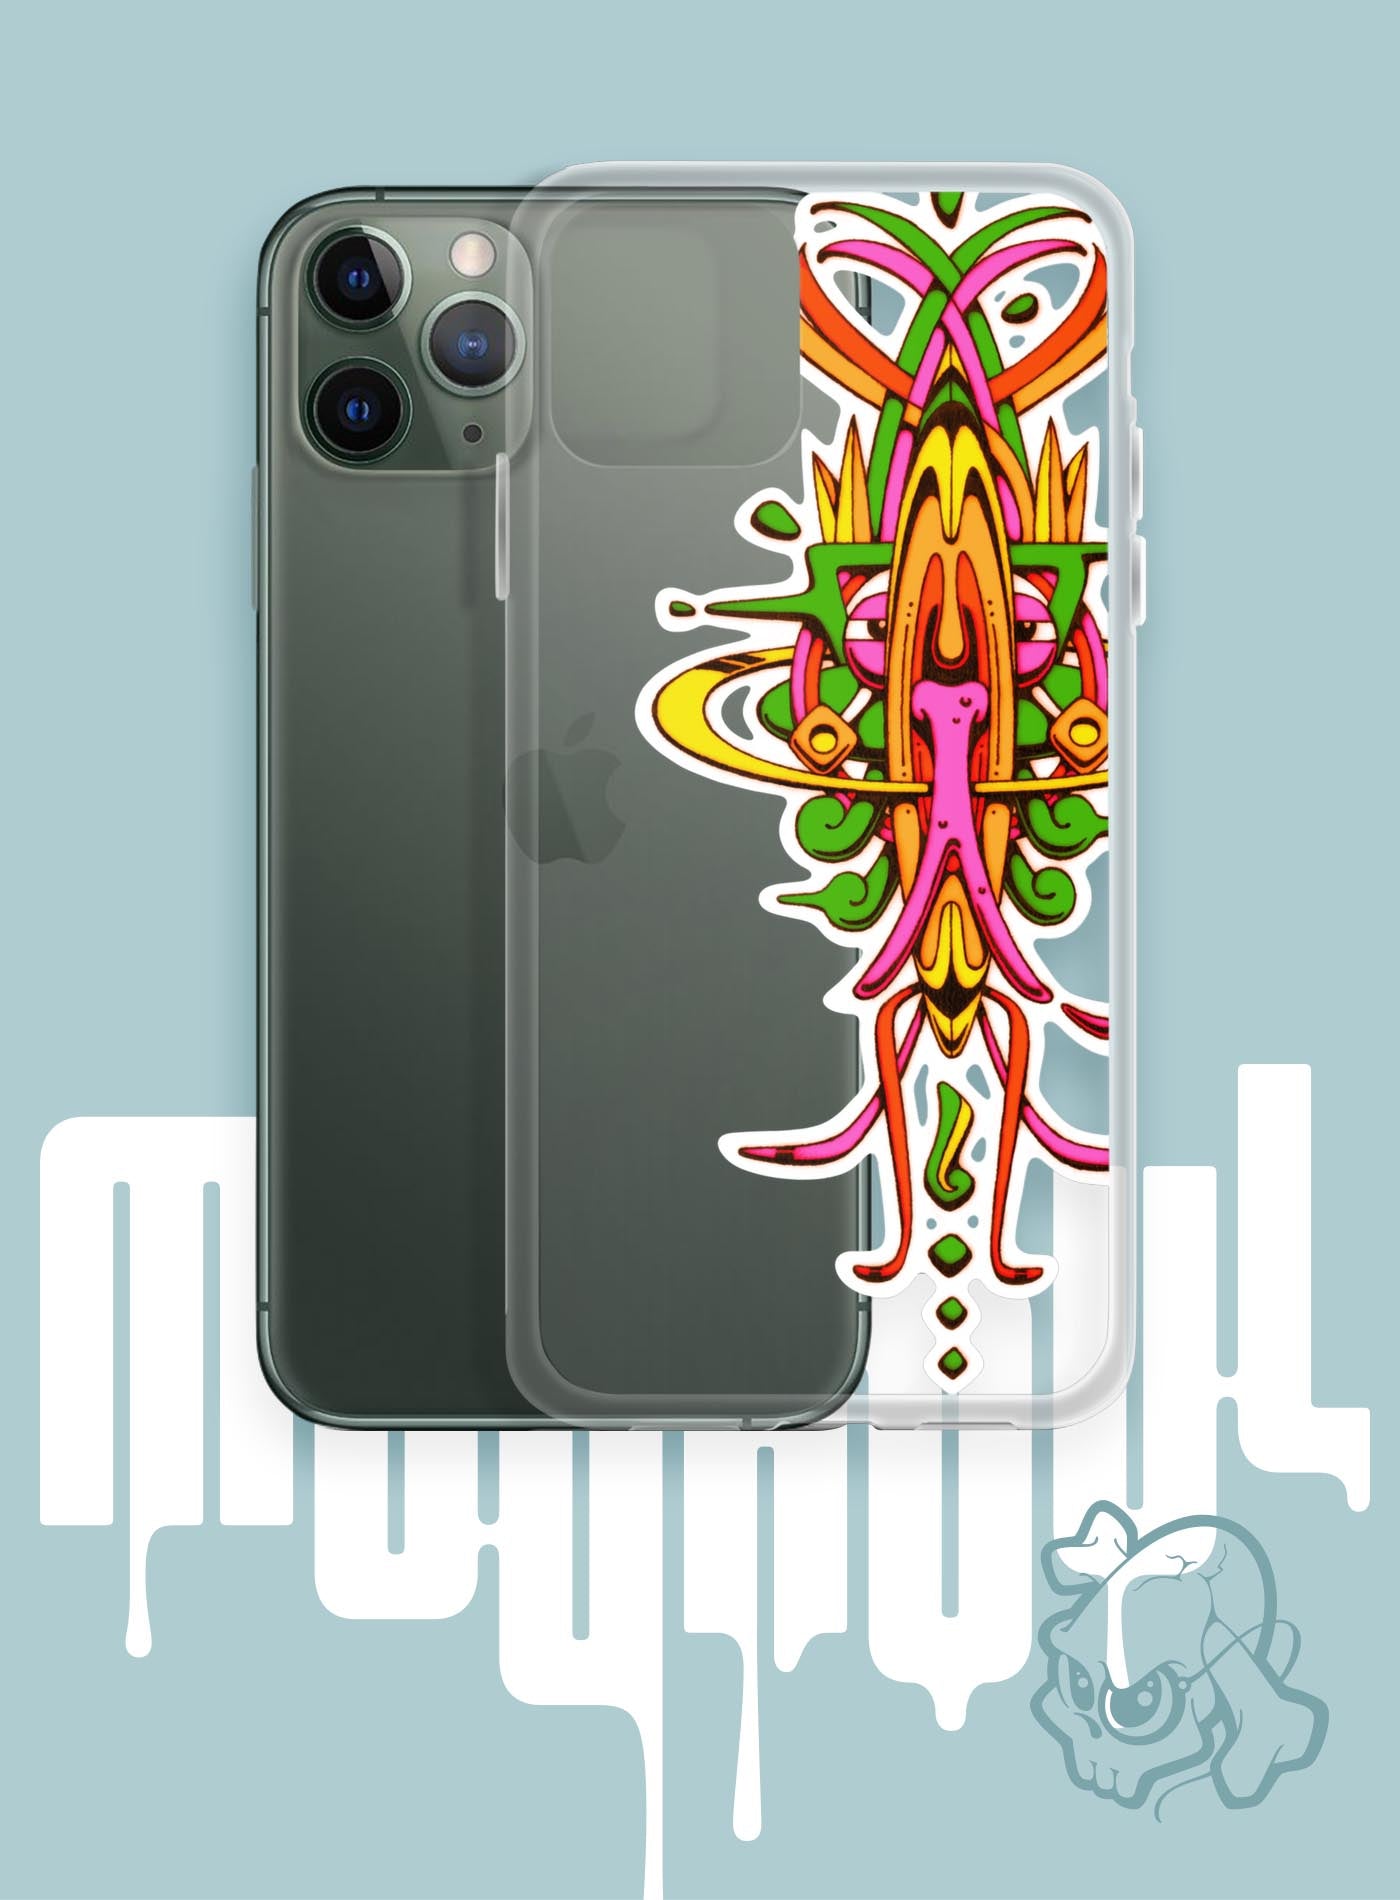 iphone case featuring a front print of the Toltec-Aztec hummingbird deity illustrated by G.M. Meave.